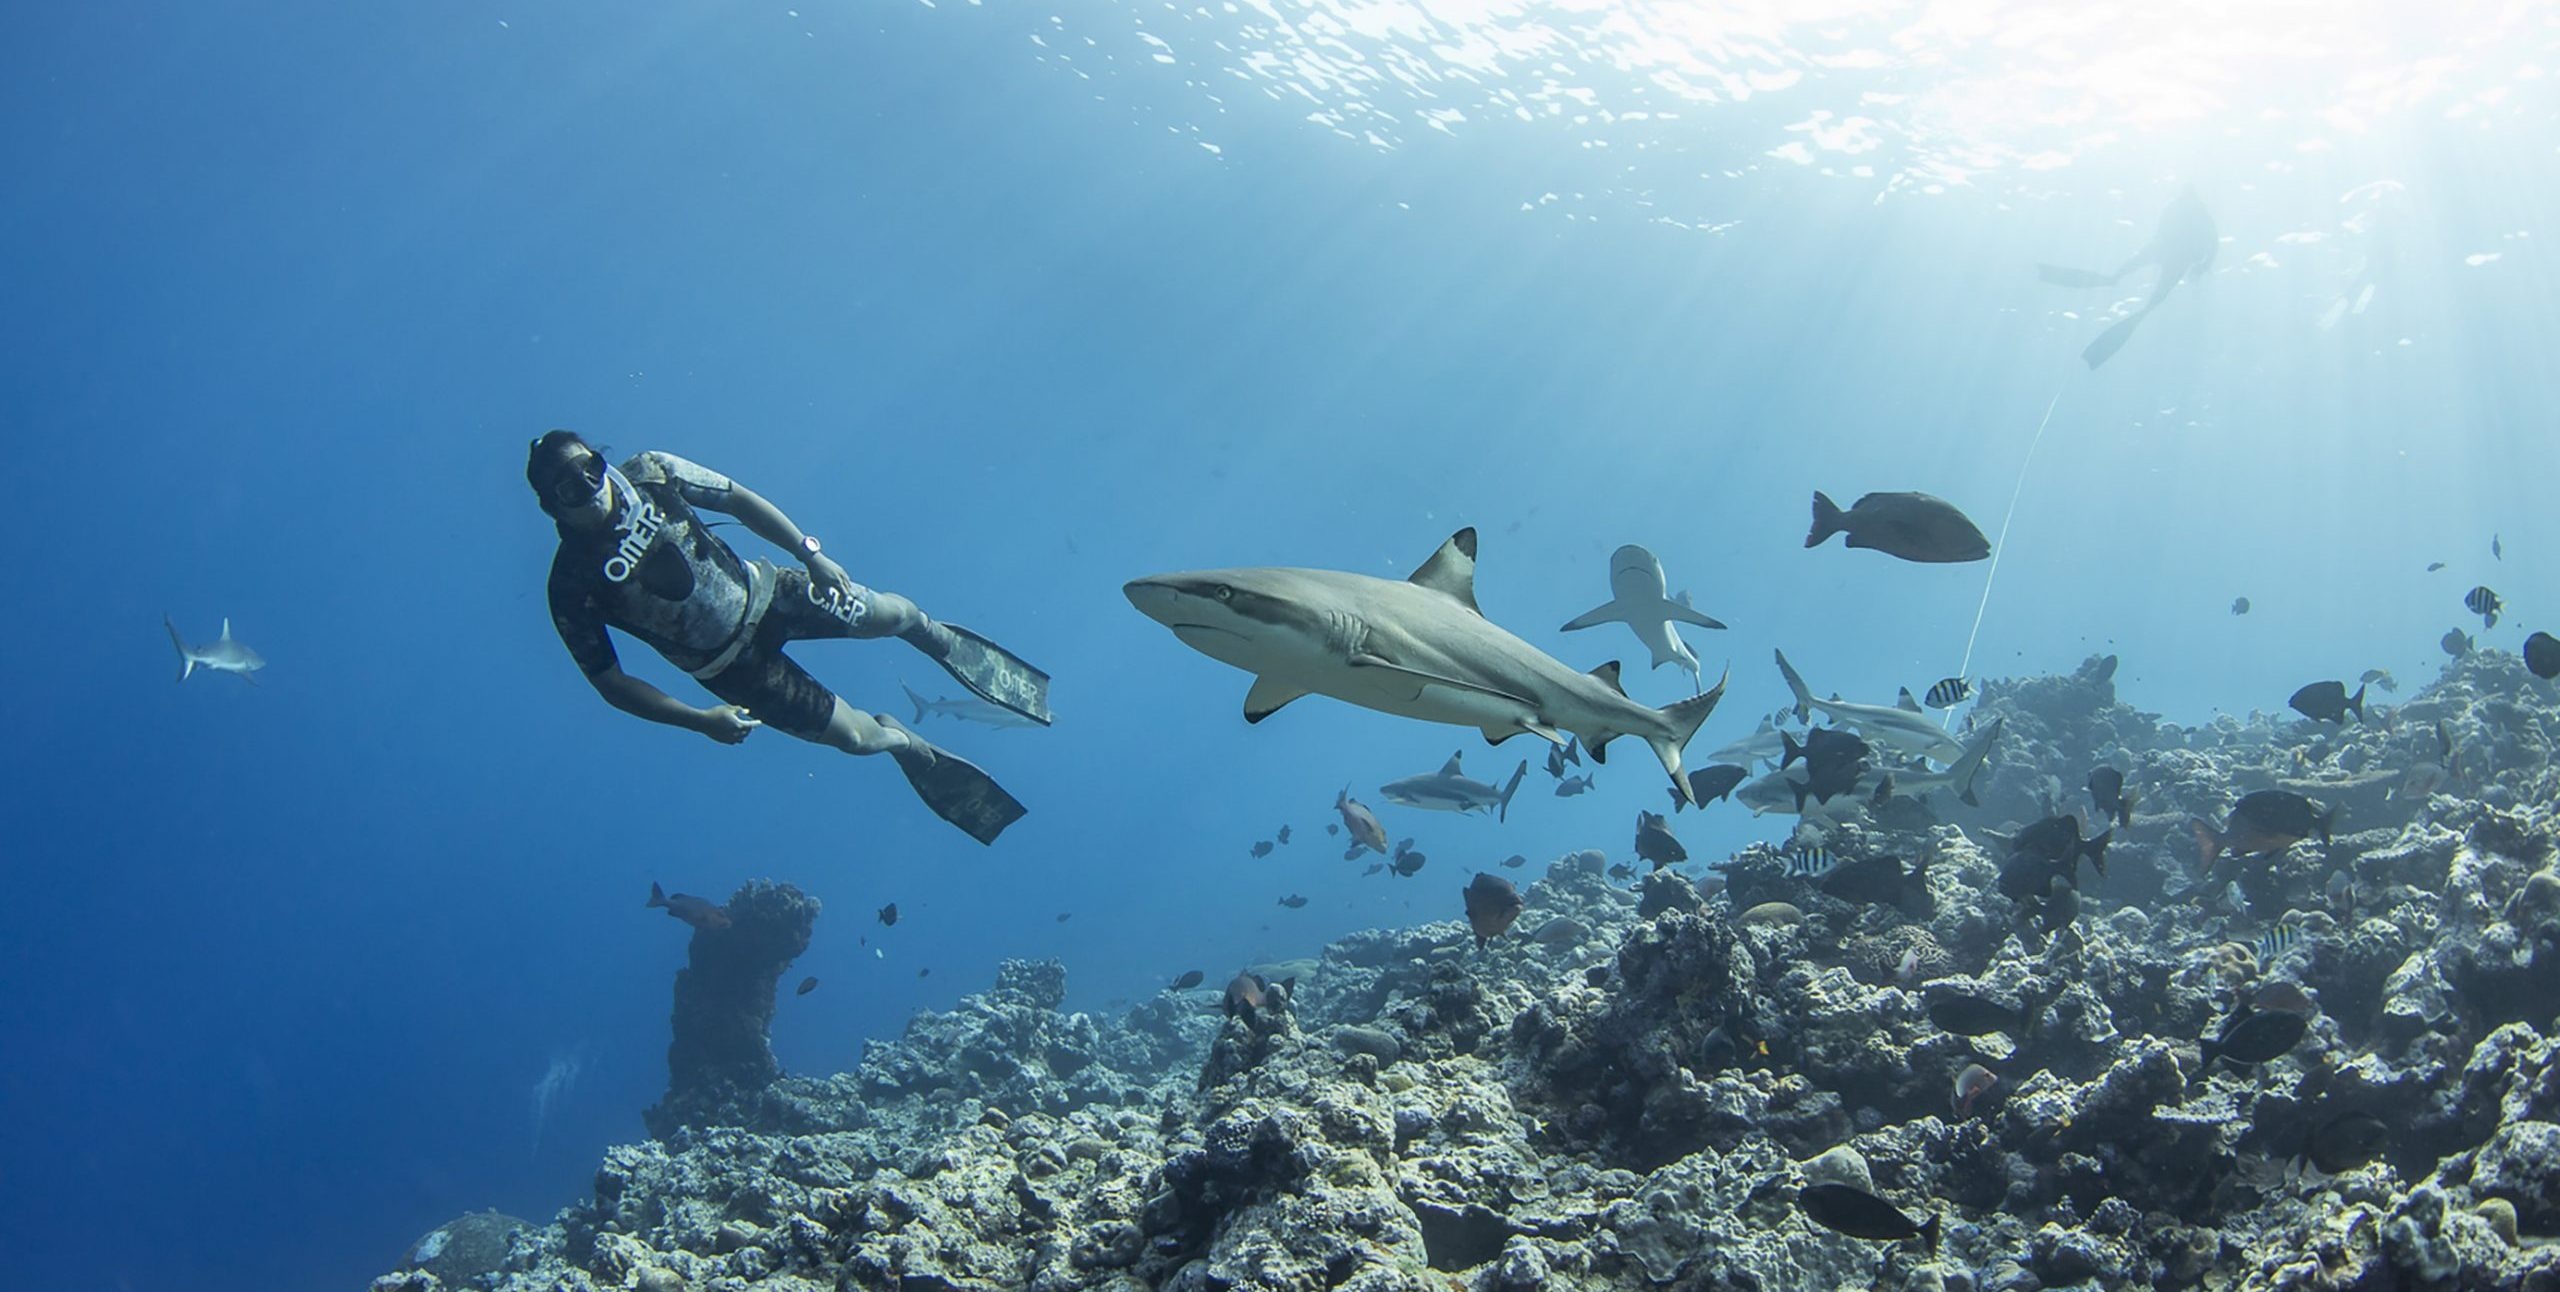 Freediving: Skin diving with sharks in Micronesia, Extremely dangerous underwater sports activity. 2560x1300 HD Wallpaper.